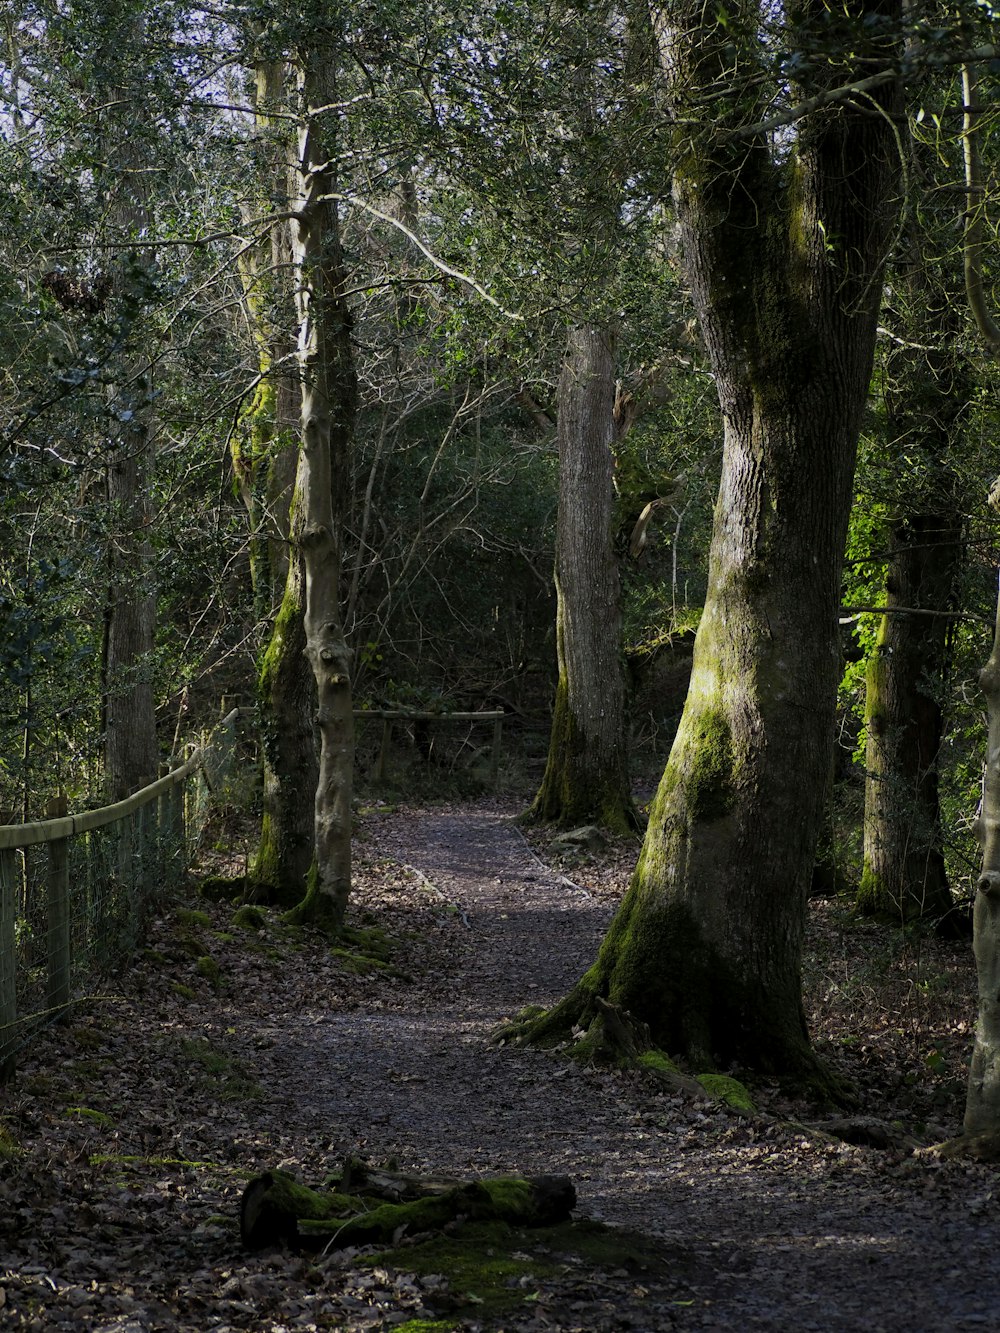 a path through a forest with trees and leaves